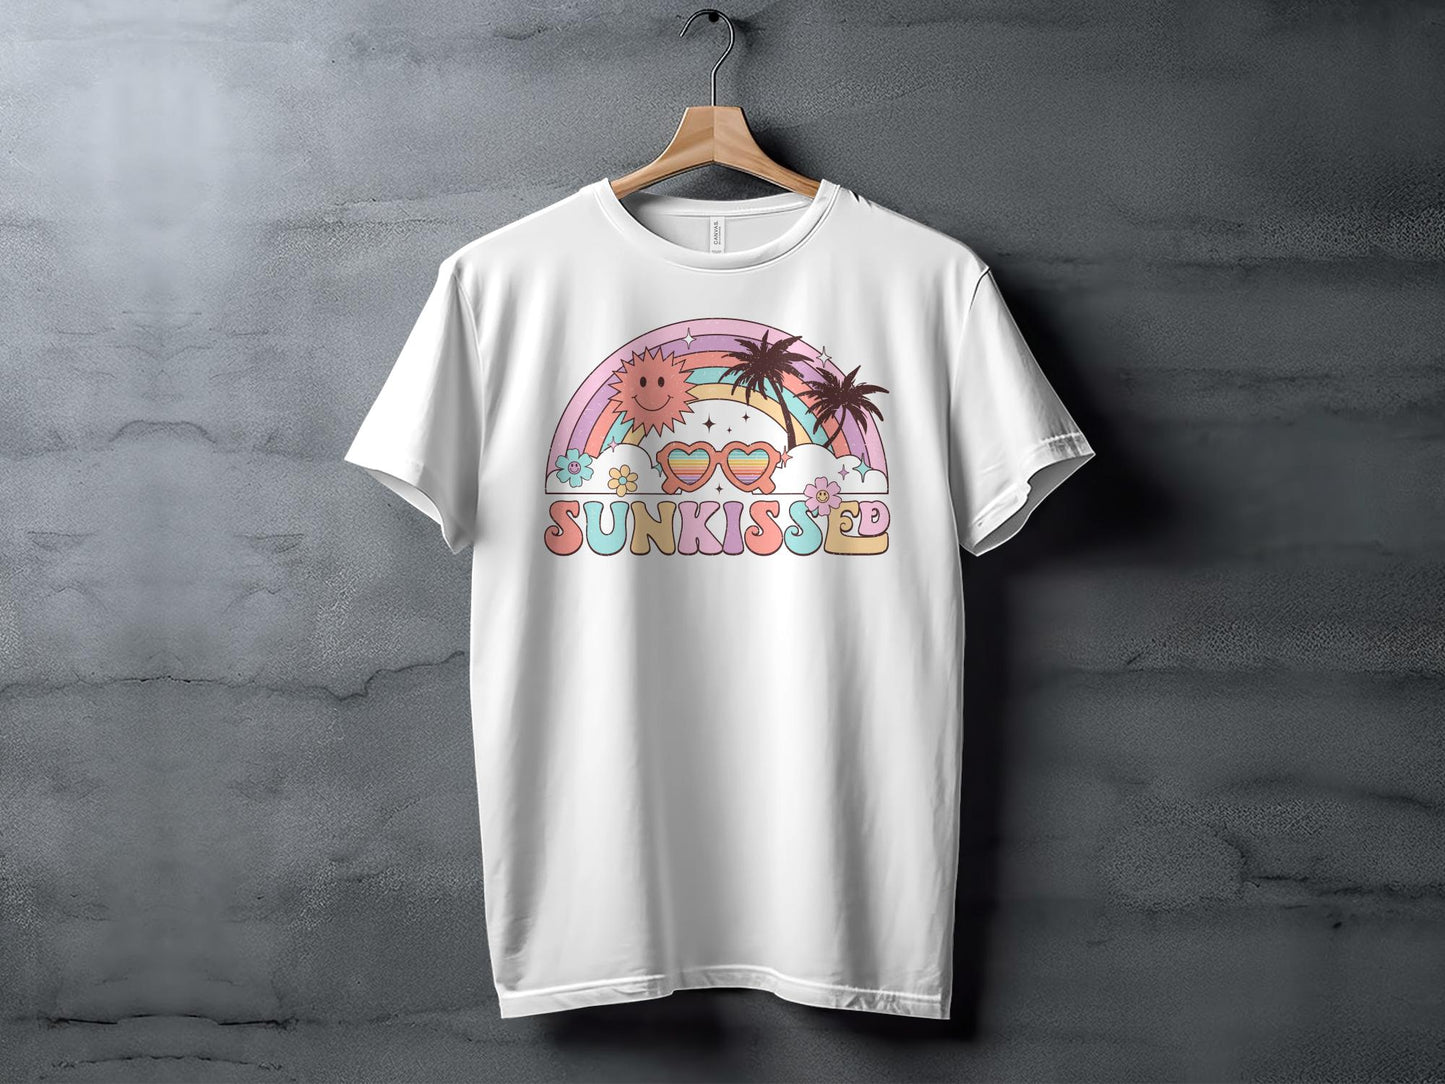 Vintage Sunkissed Rainbow Graphic Tee, Retro Summer Vibes T-Shirt, Beach Lover Casual Shirt